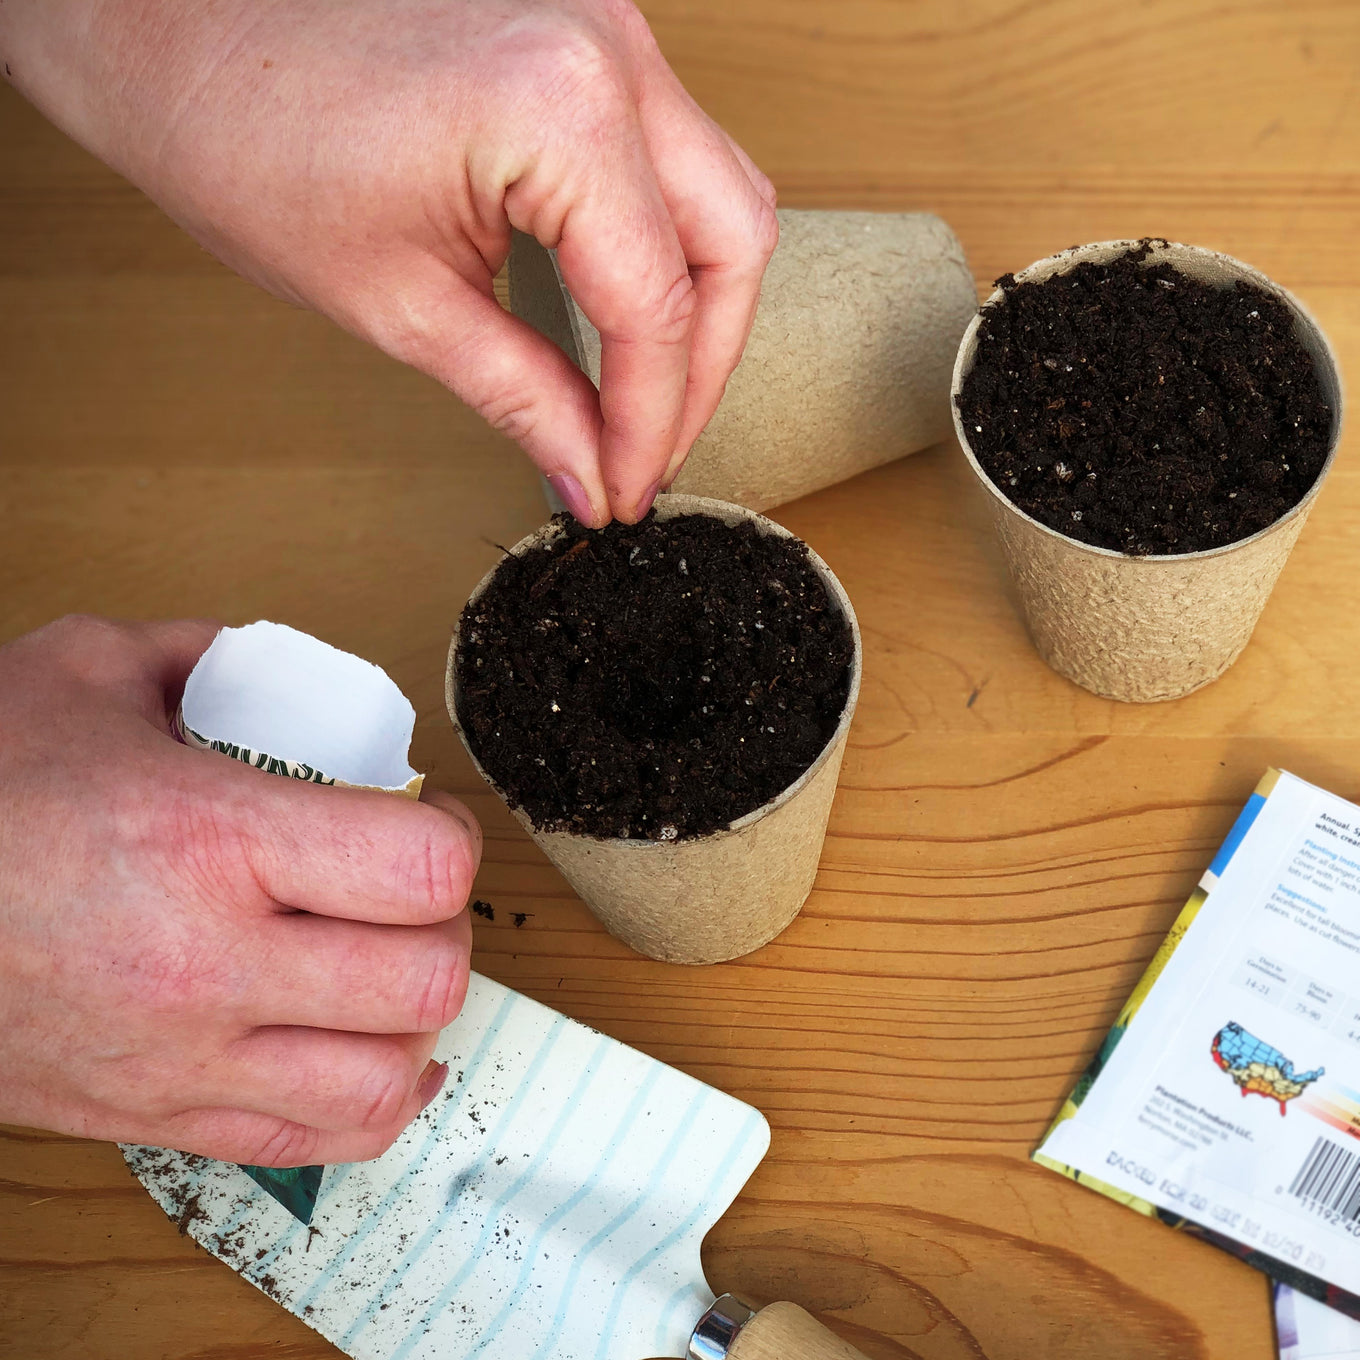 Sowing Organic Green Sprouting Calabrese Broccoli Seeds into biodegradable Jiffy peat pots filled with seed starting mix.